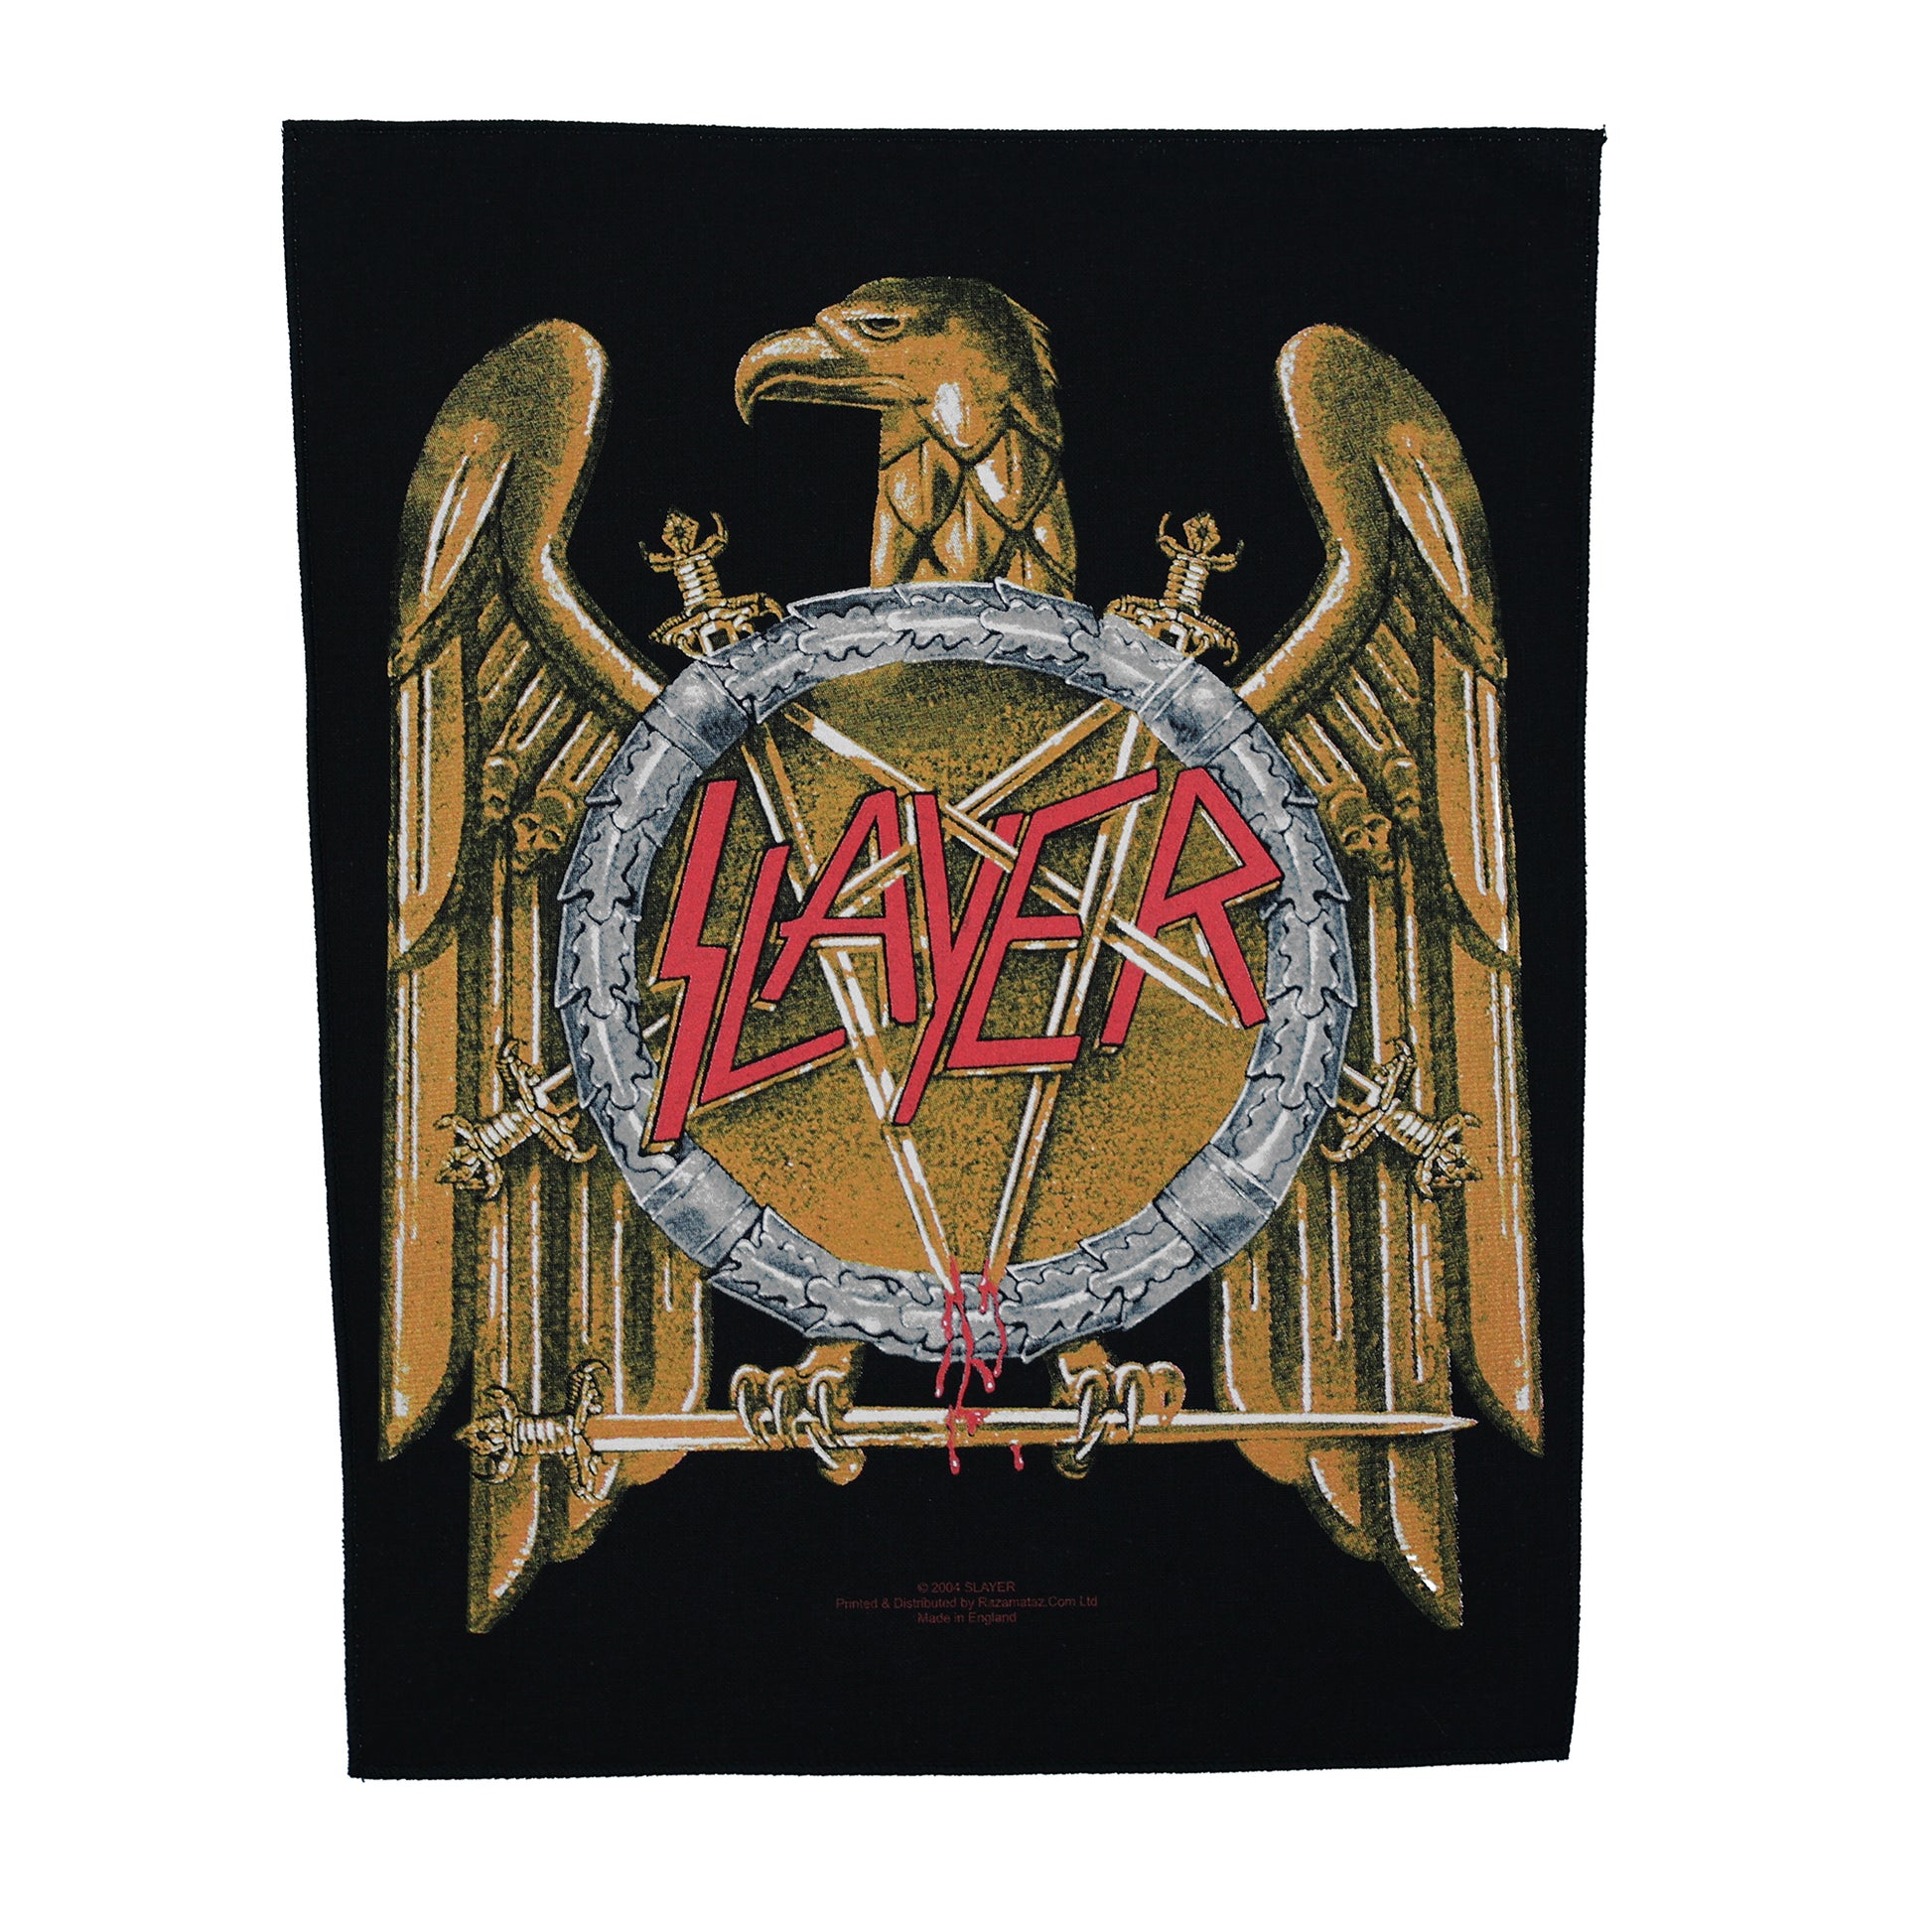 Slayer Golden Eagle Logo Patch Metal Band XL Woven Sew On 